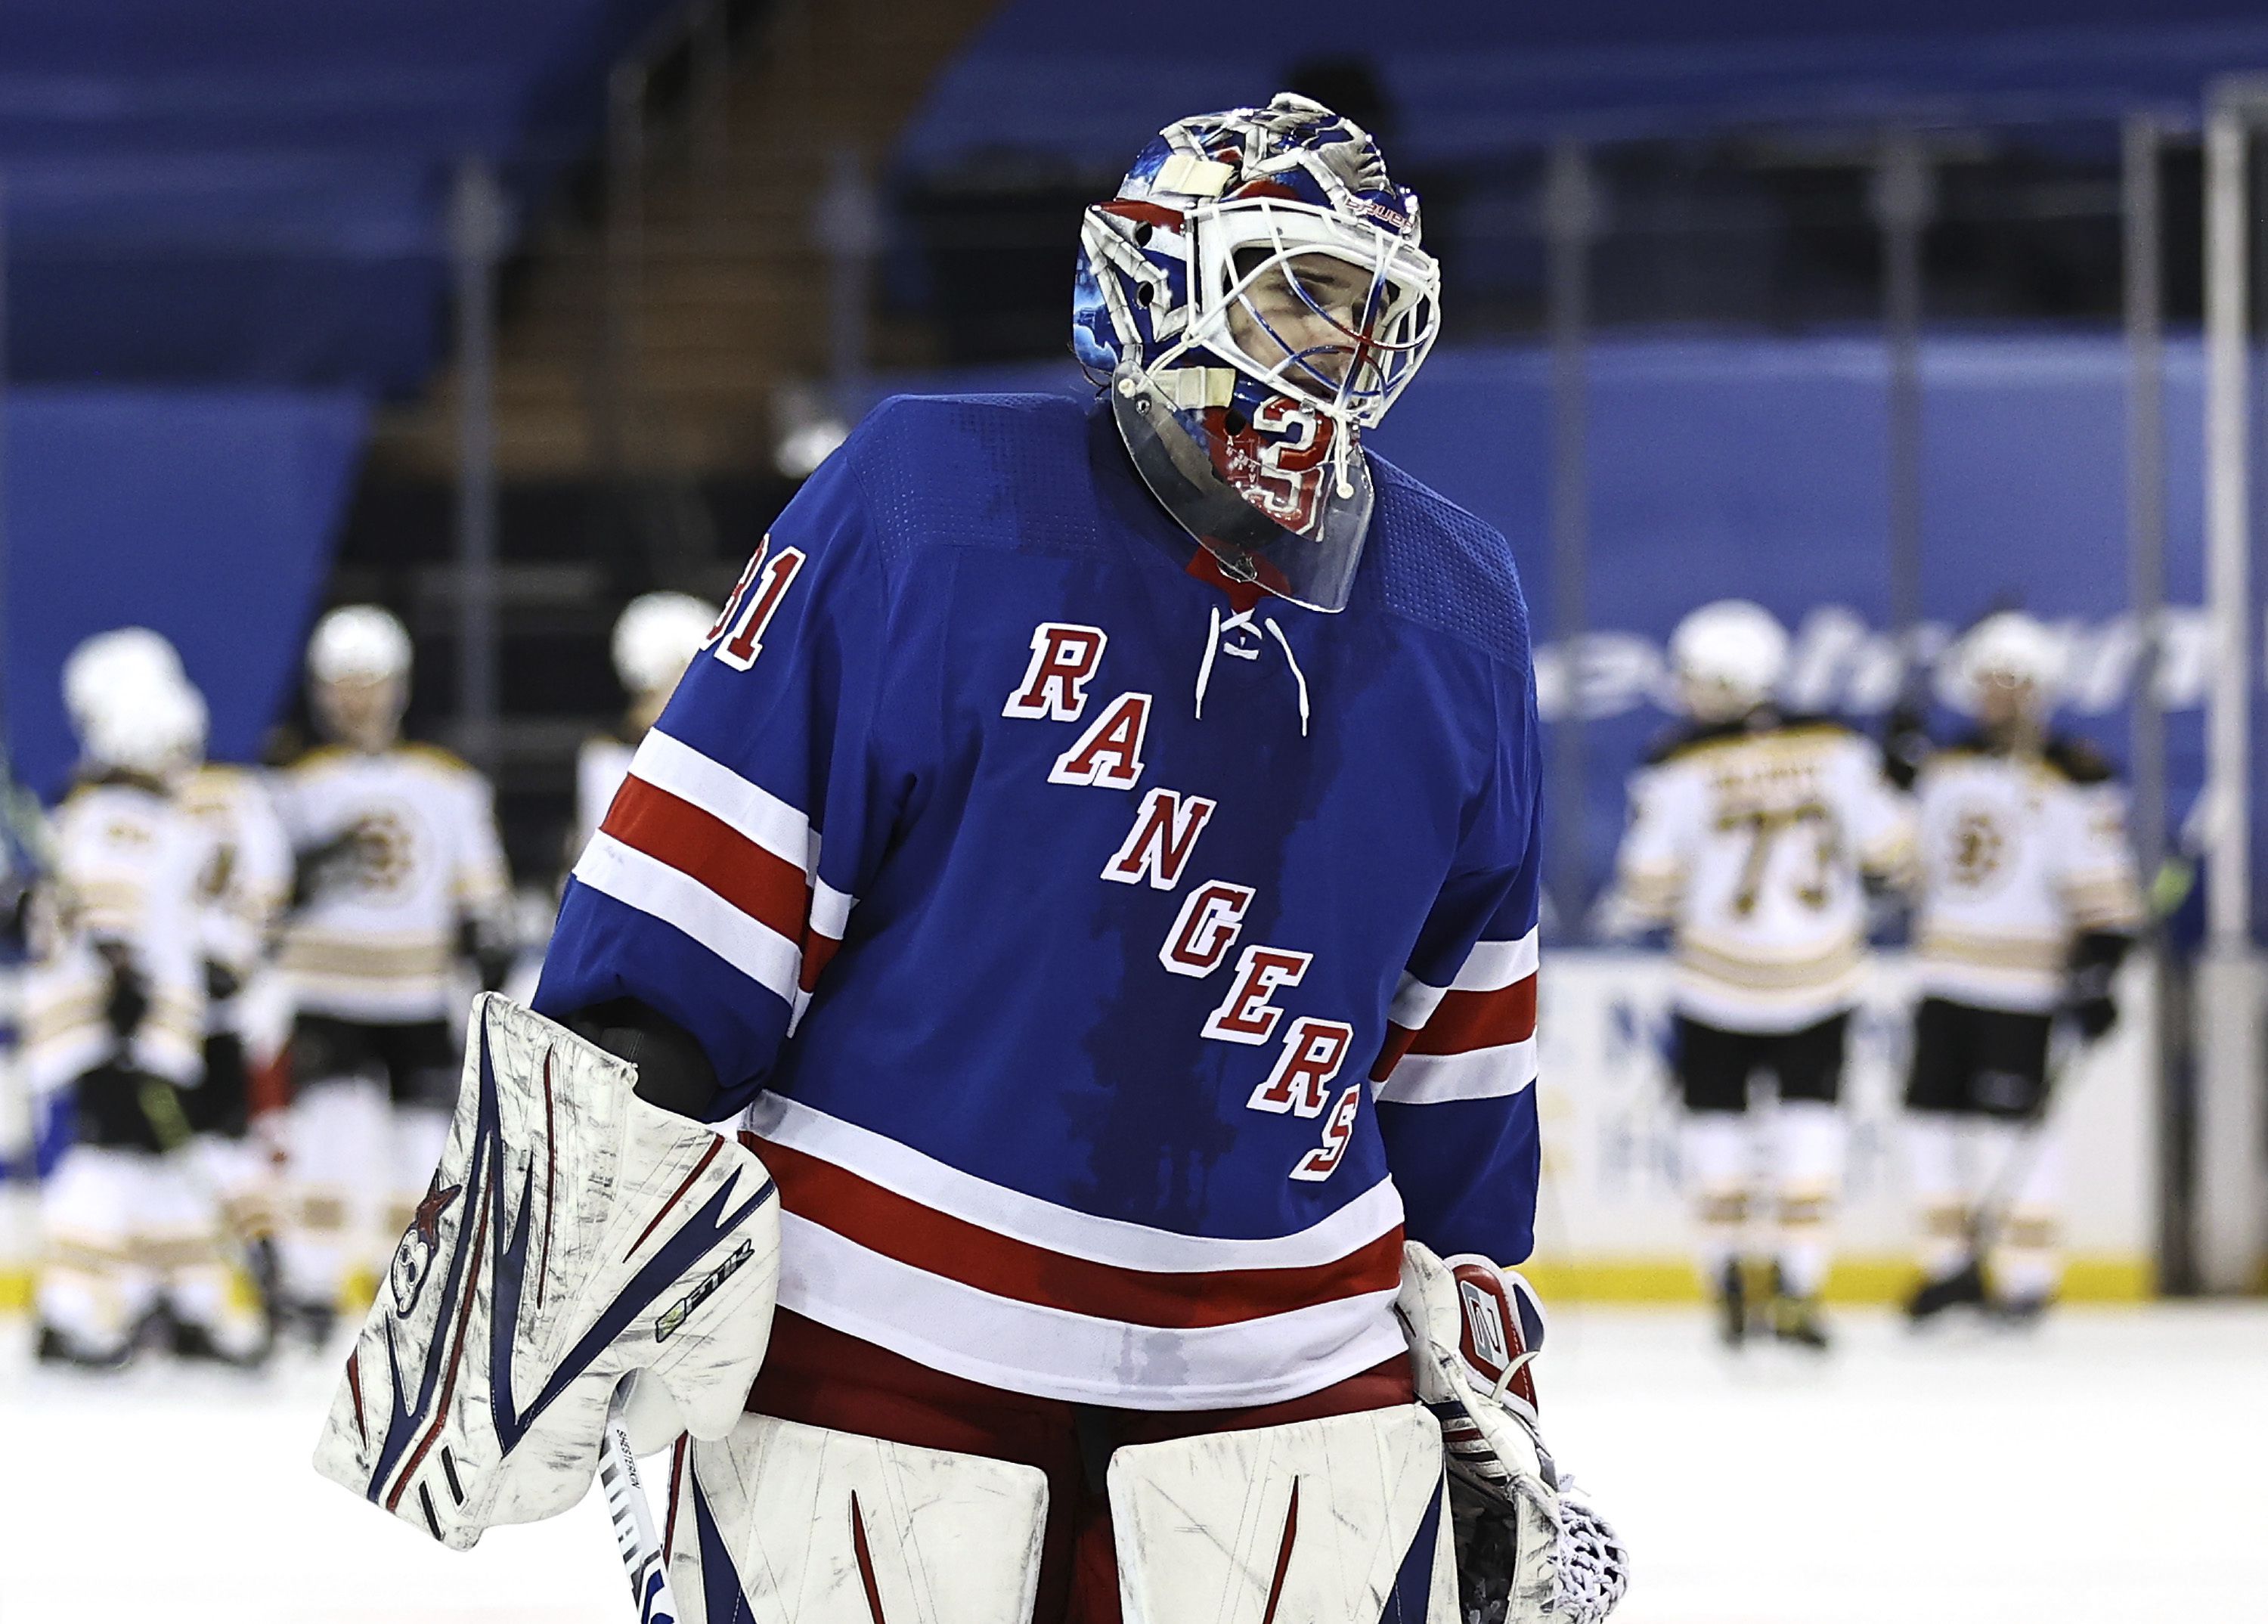 How to watch New York Rangers vs. New Jersey Devils (4/13/2021